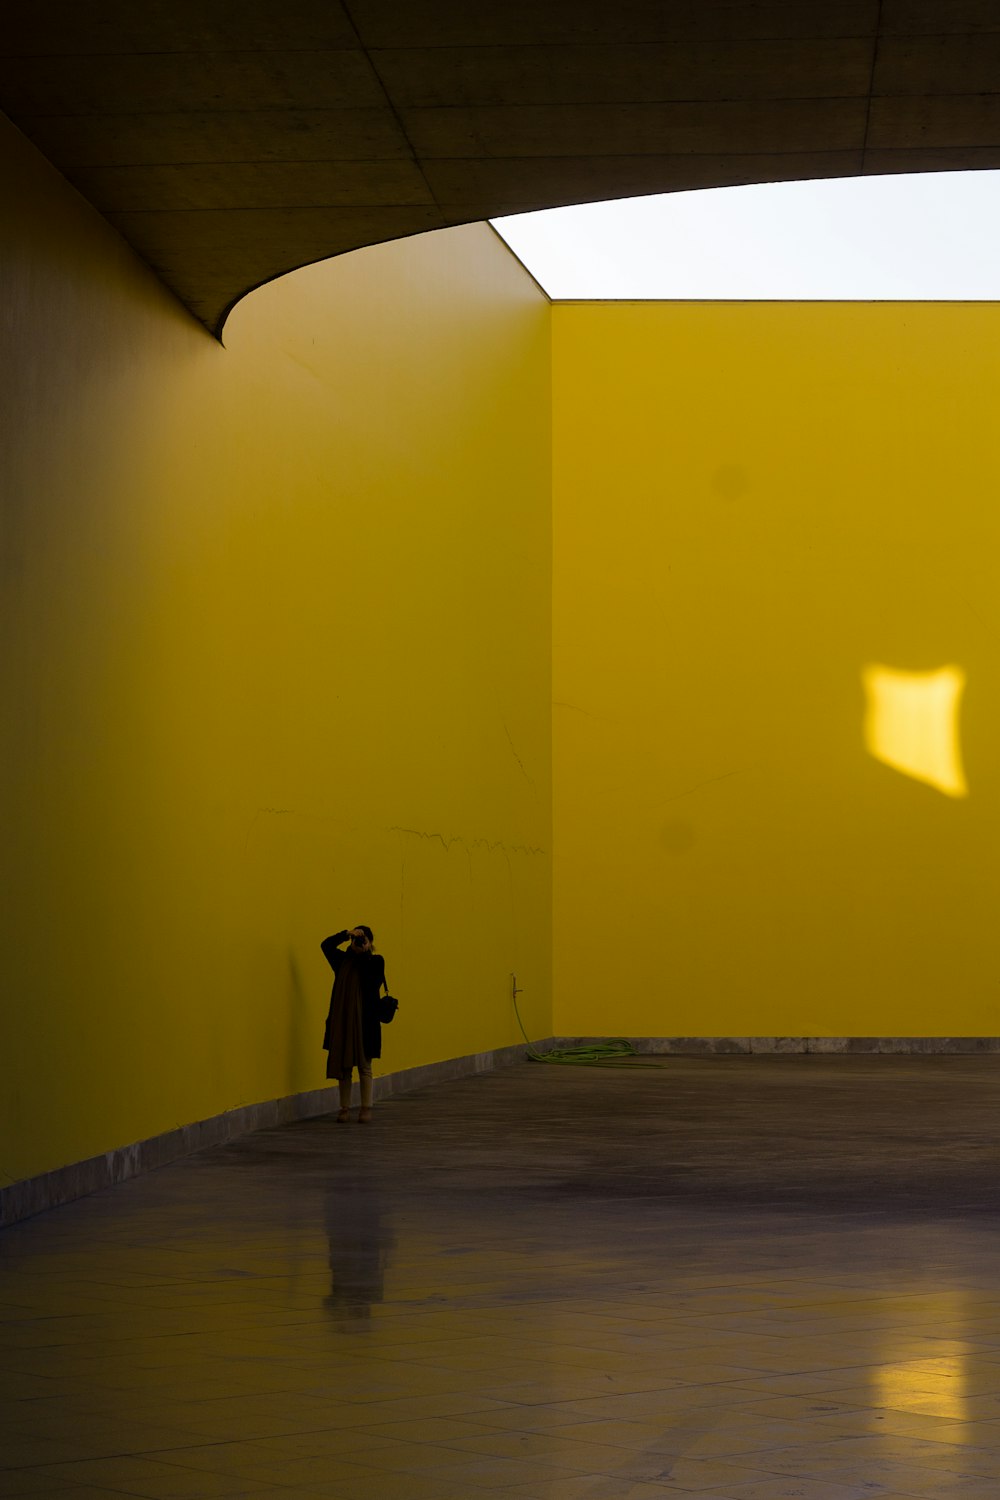 a person standing in a room with a yellow wall